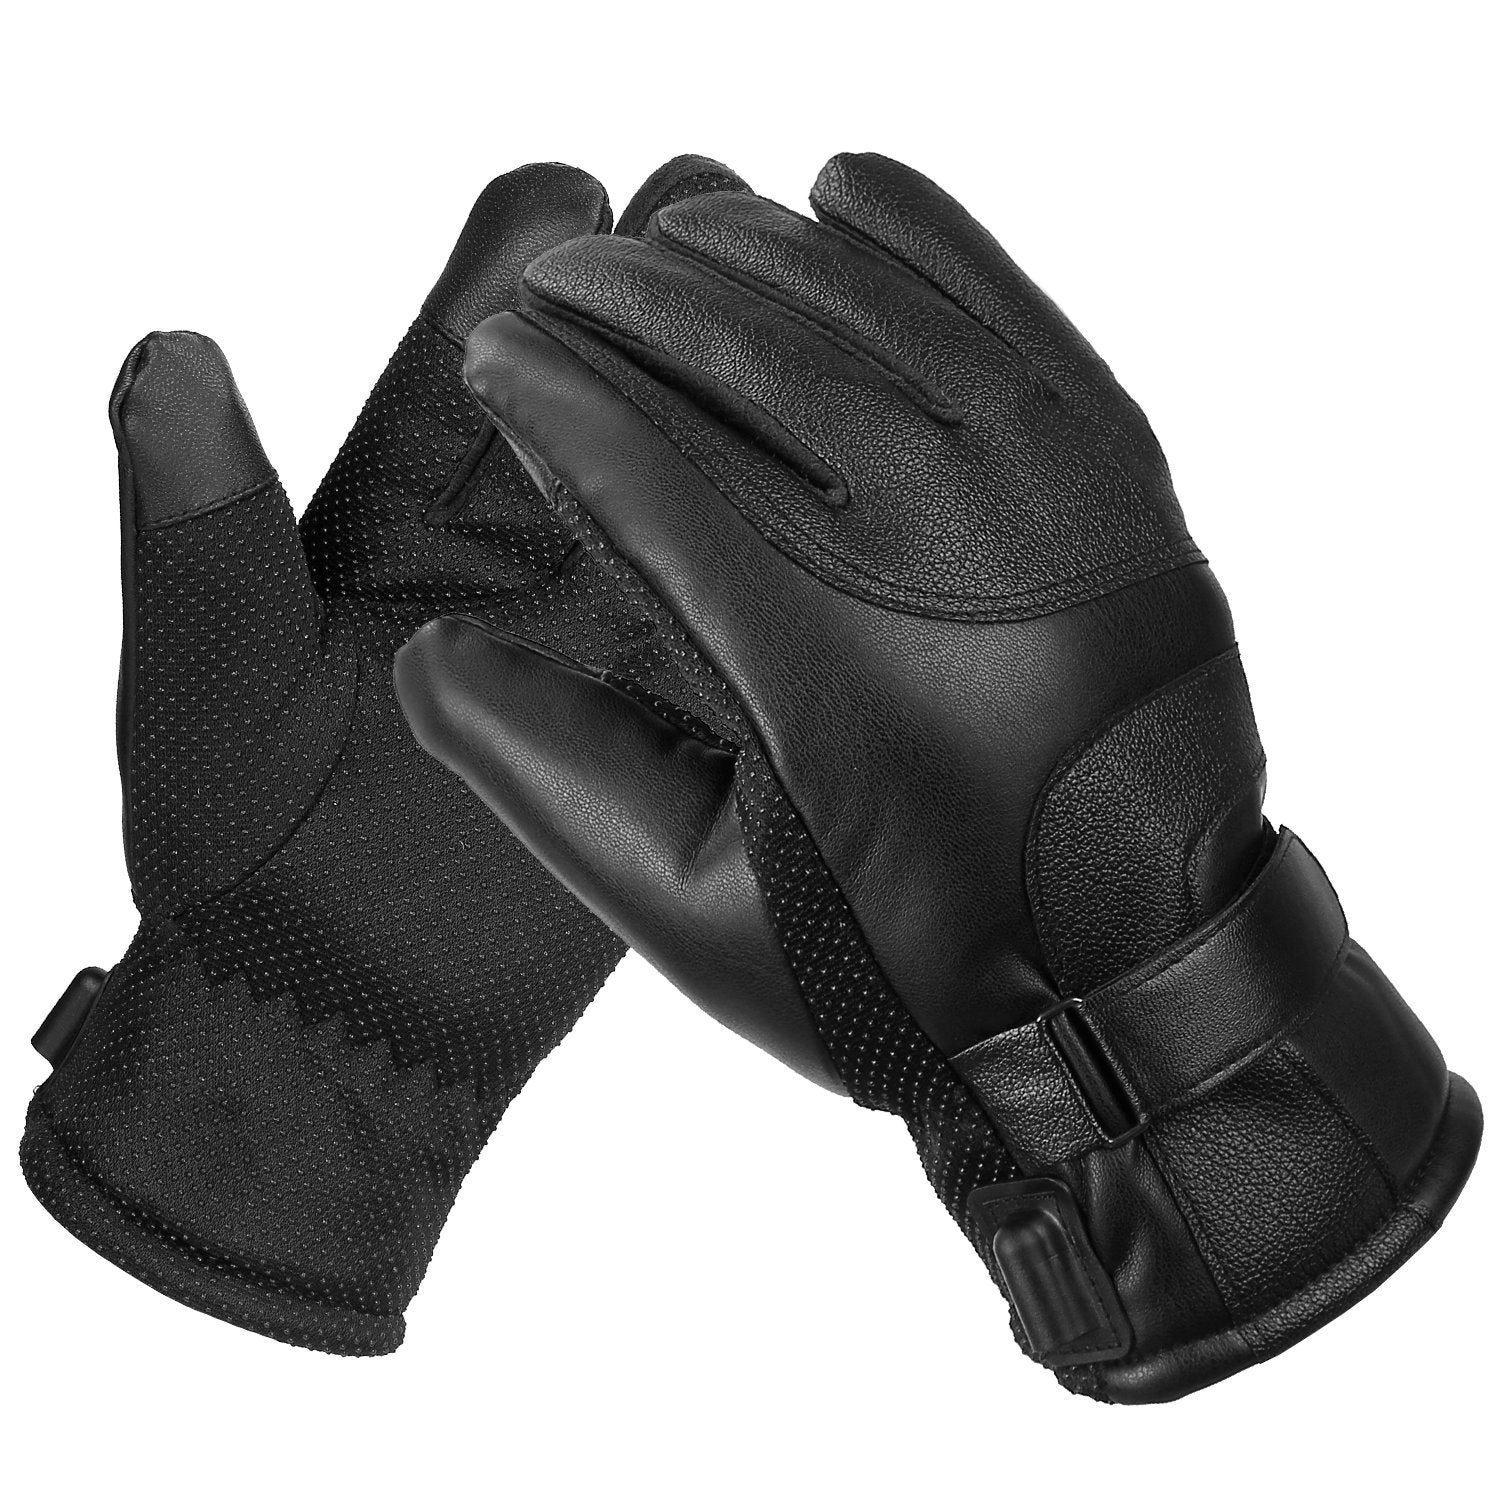 
  
  Electric Heated Gloves USB Plug Touchscreen Thermal Gloves Leather
  
